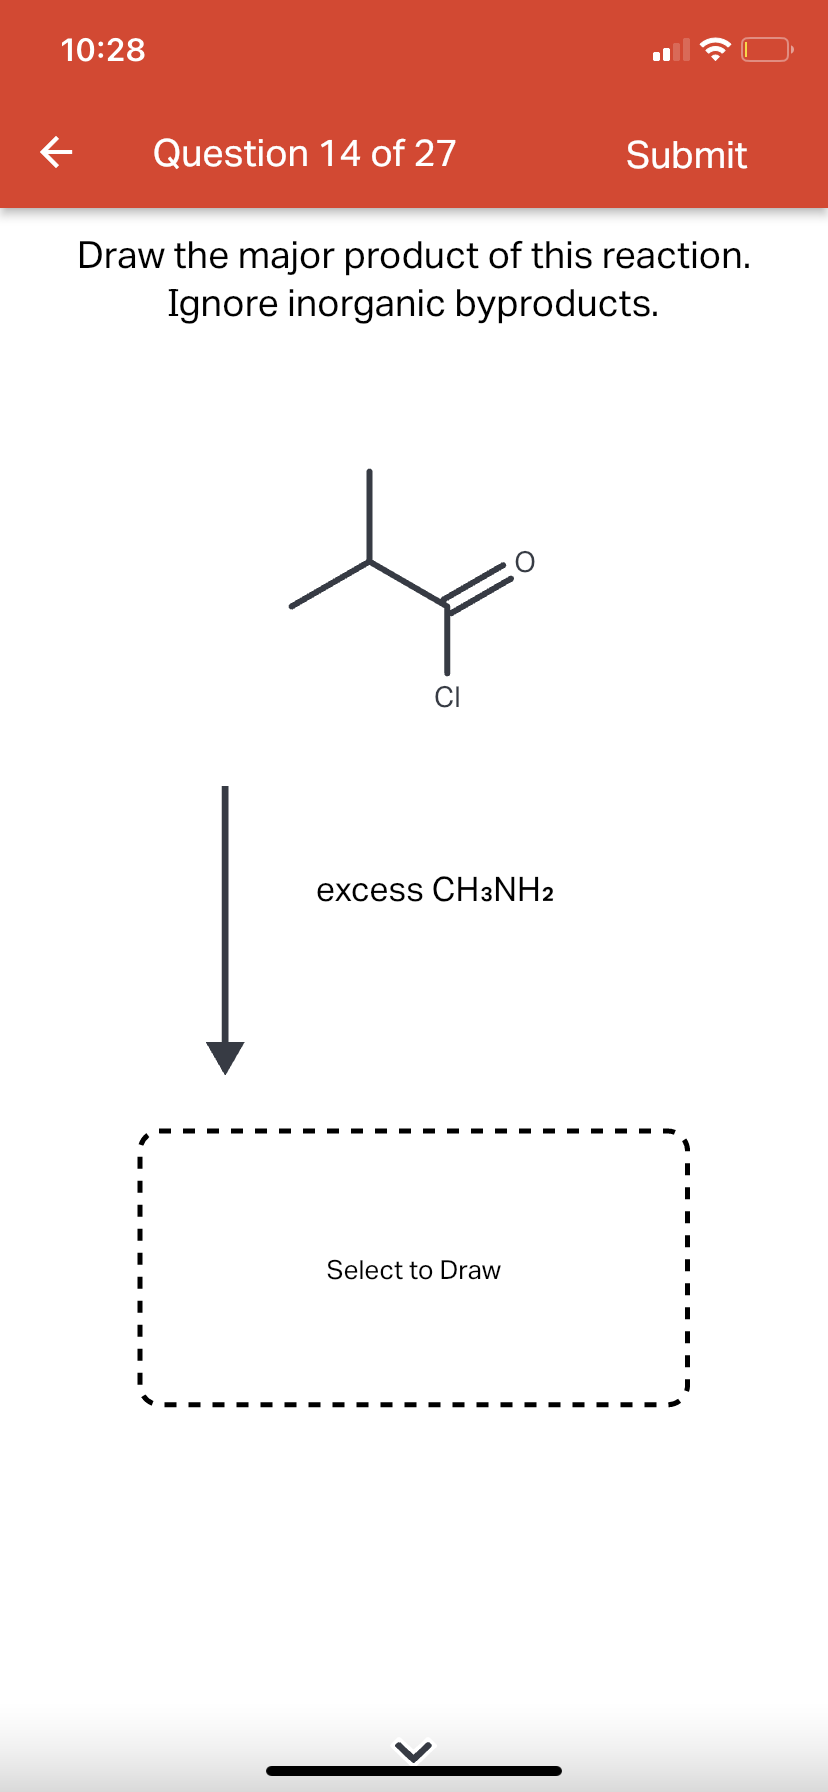 10:28
←
Question 14 of 27
Draw the major product of this reaction.
Ignore inorganic byproducts.
excess CH3NH₂
Submit
Select to Draw